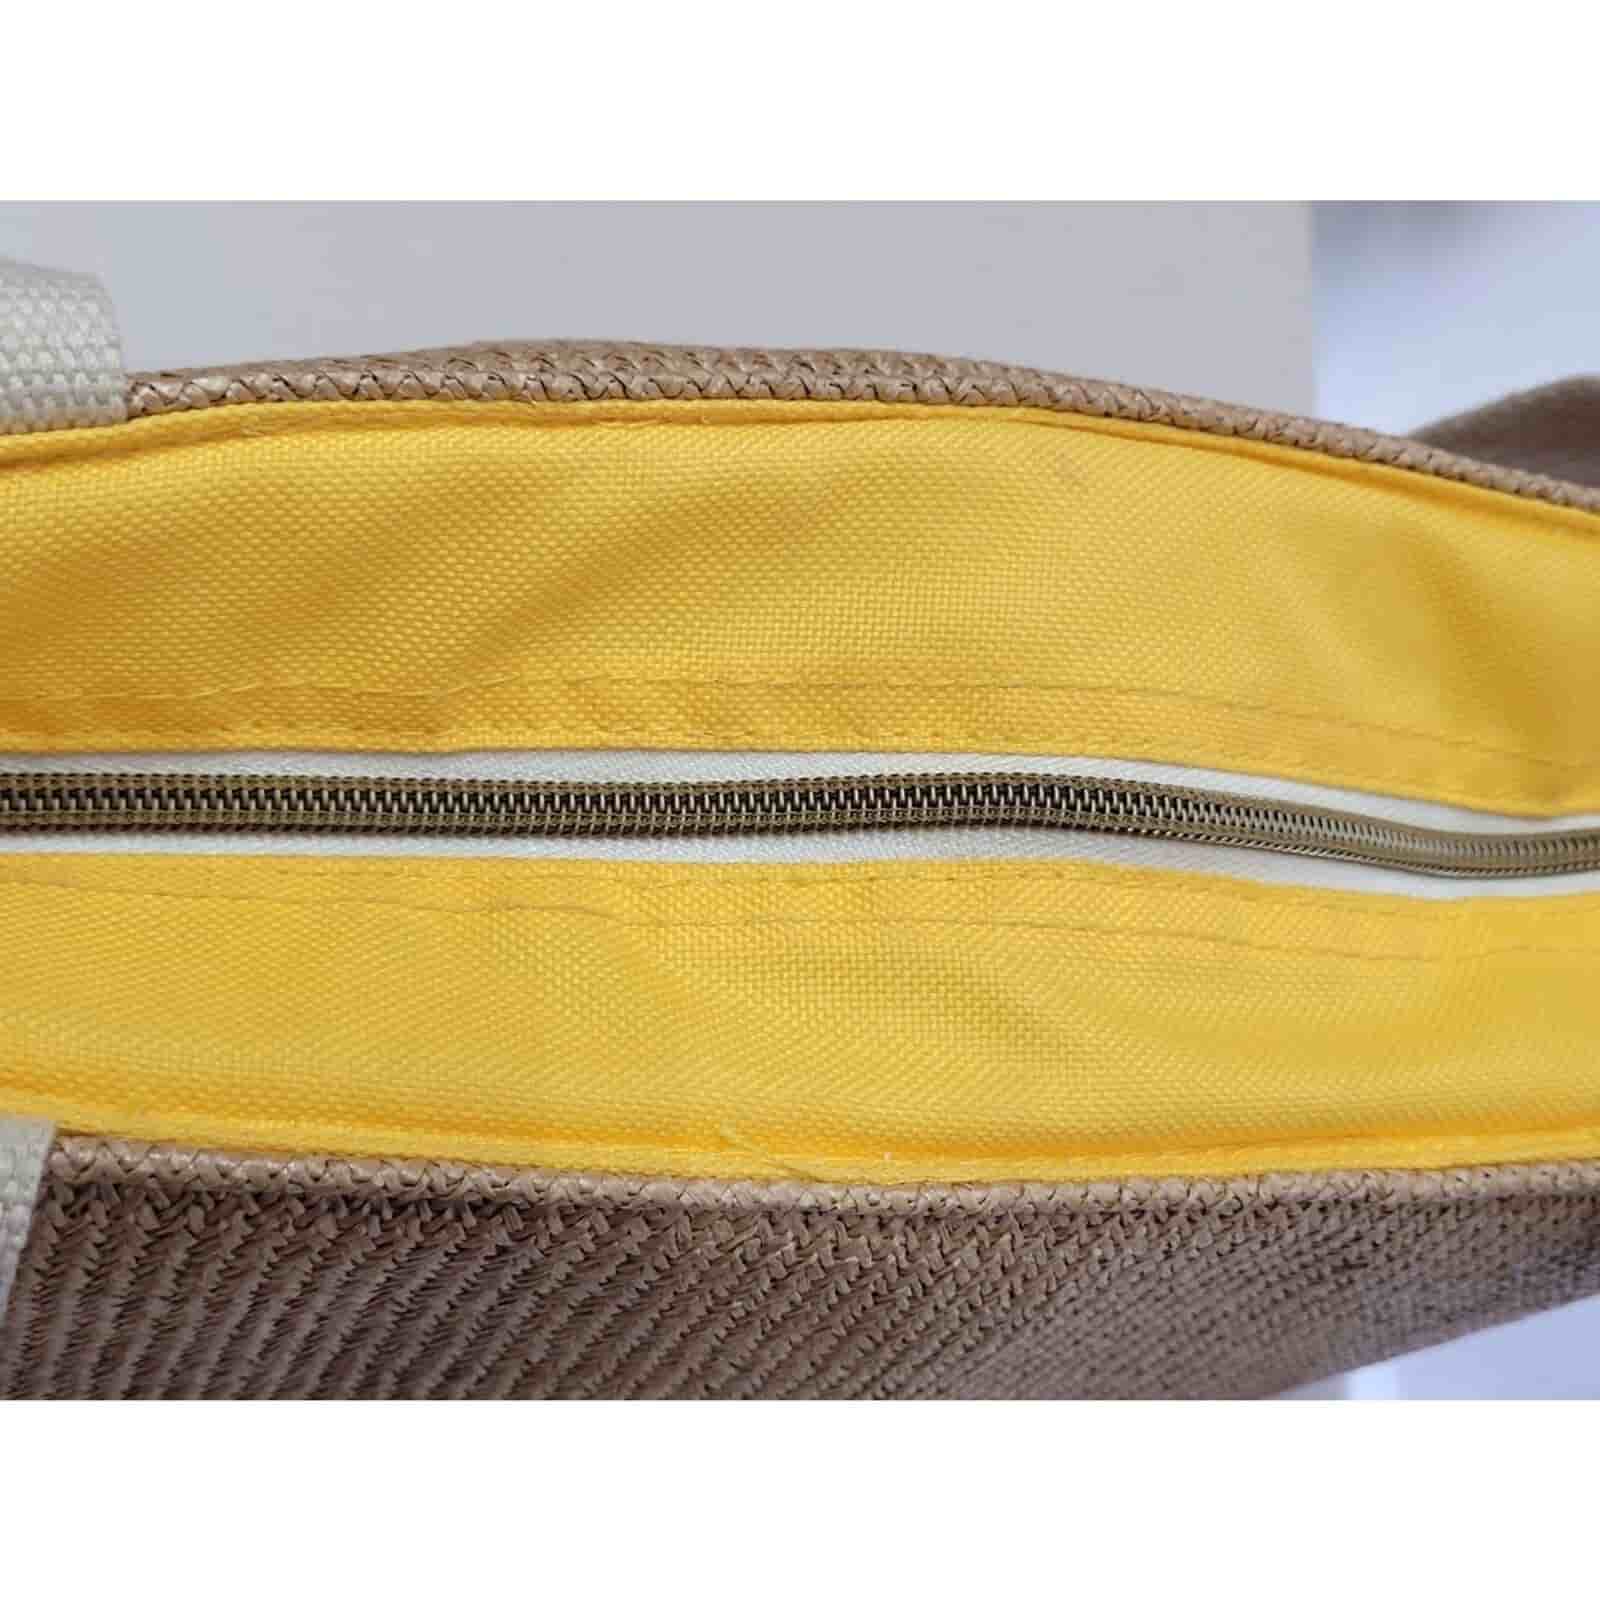 Insulated Lunch Bag Cooler Beach Tote Yellow Beige Weave Straw wholesale details2